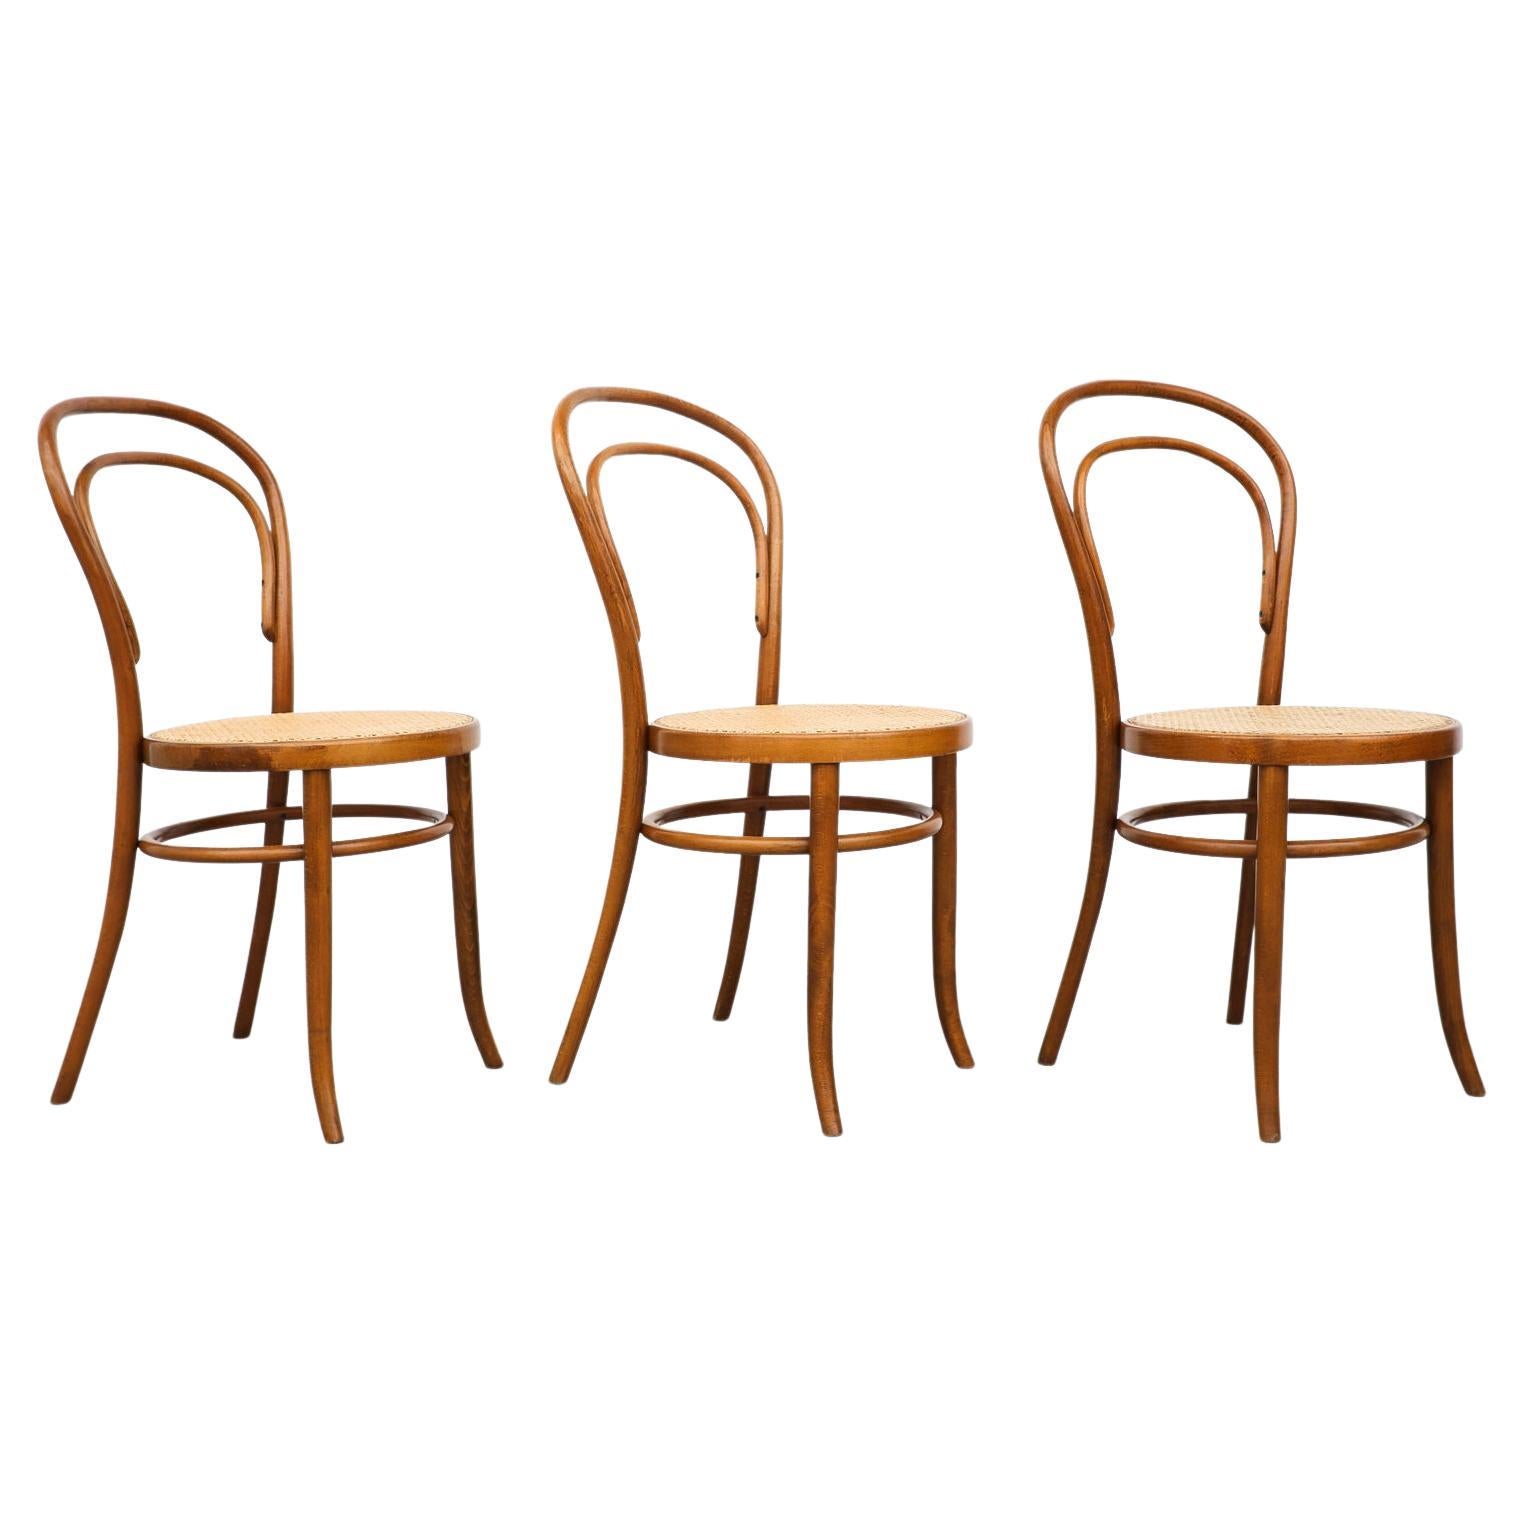 Thonet No. 4 Bentwood and Cane Cafe Chairs